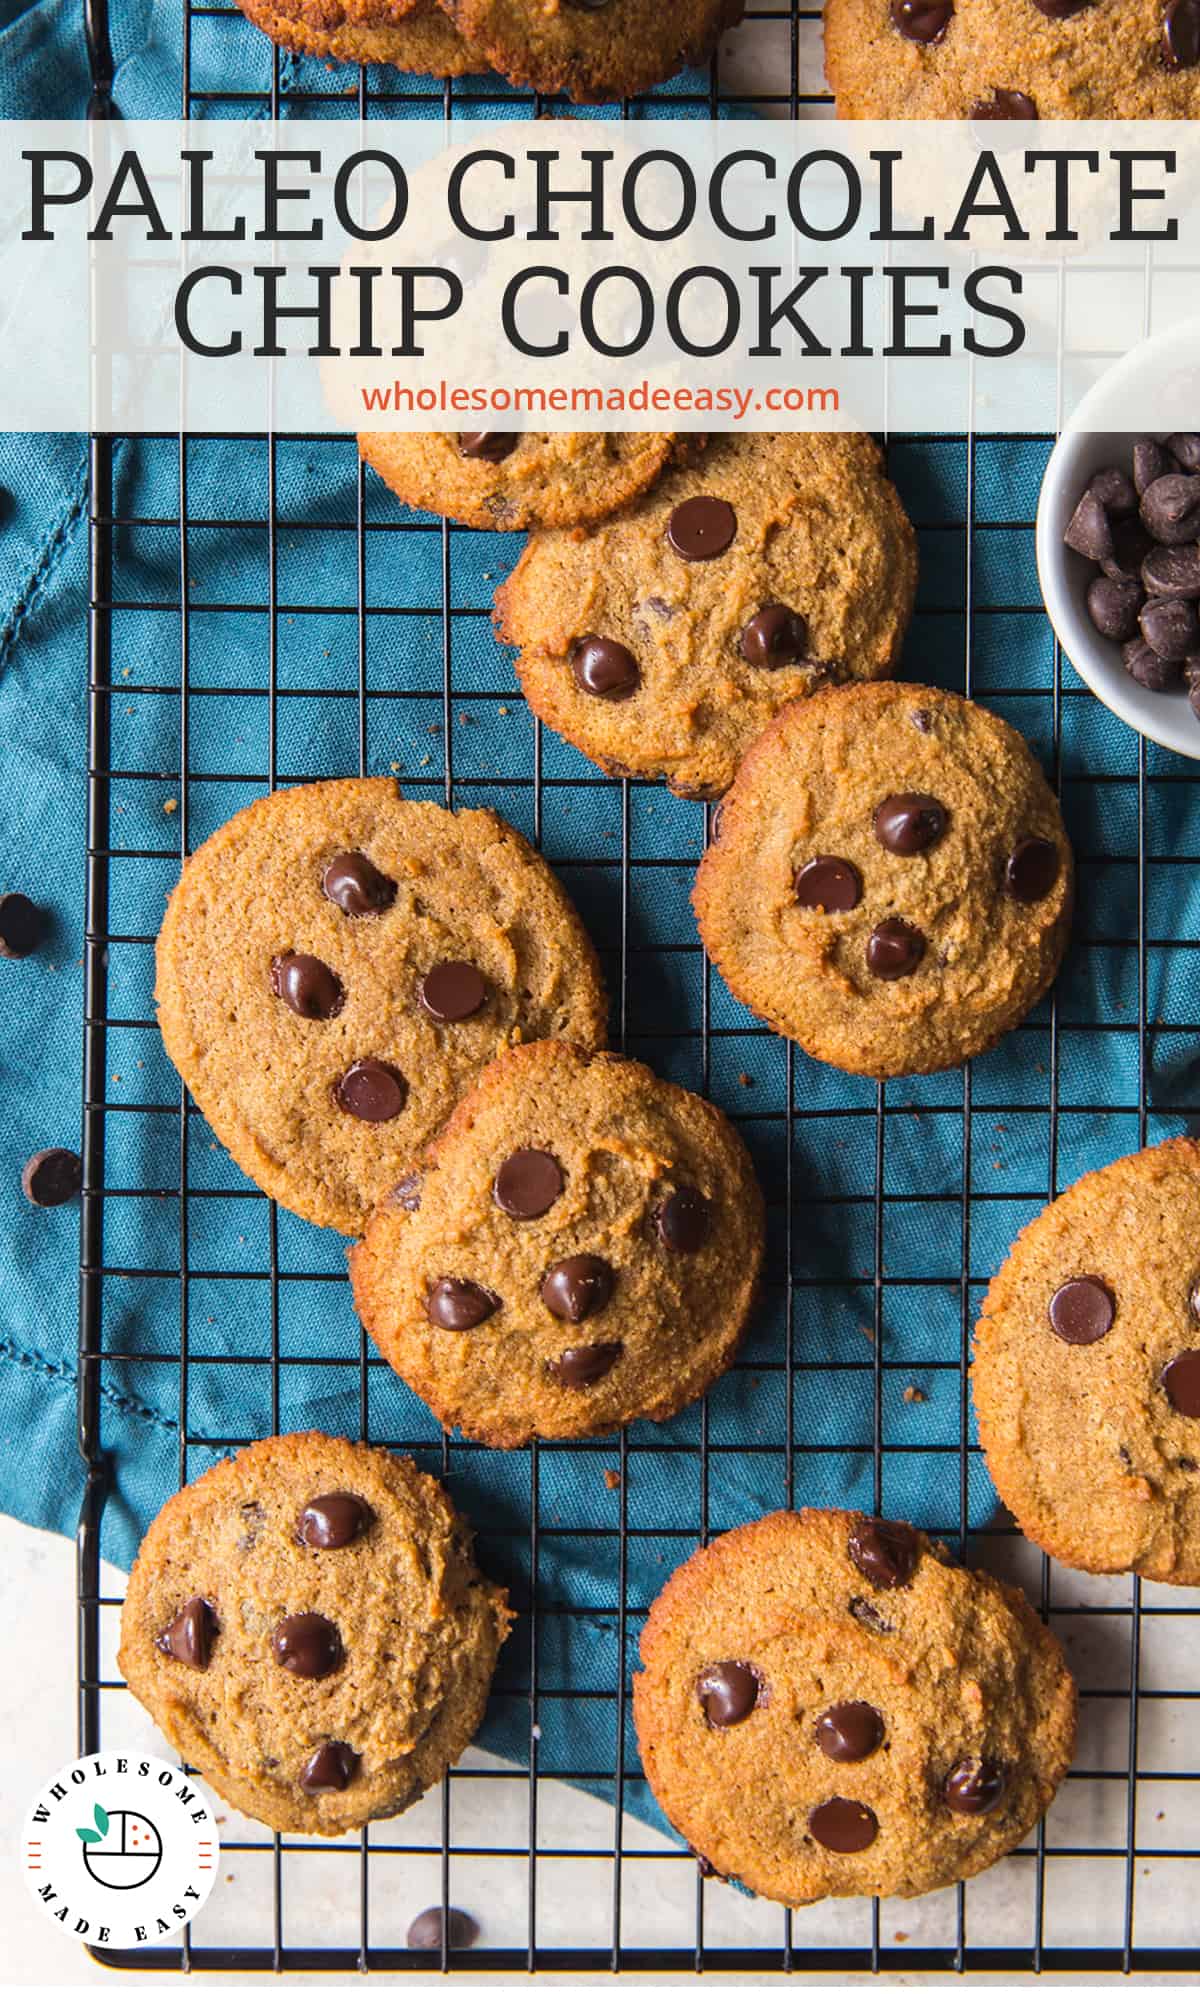 Paleo Chocolate Chip Cookies on wire rack with text overlay.